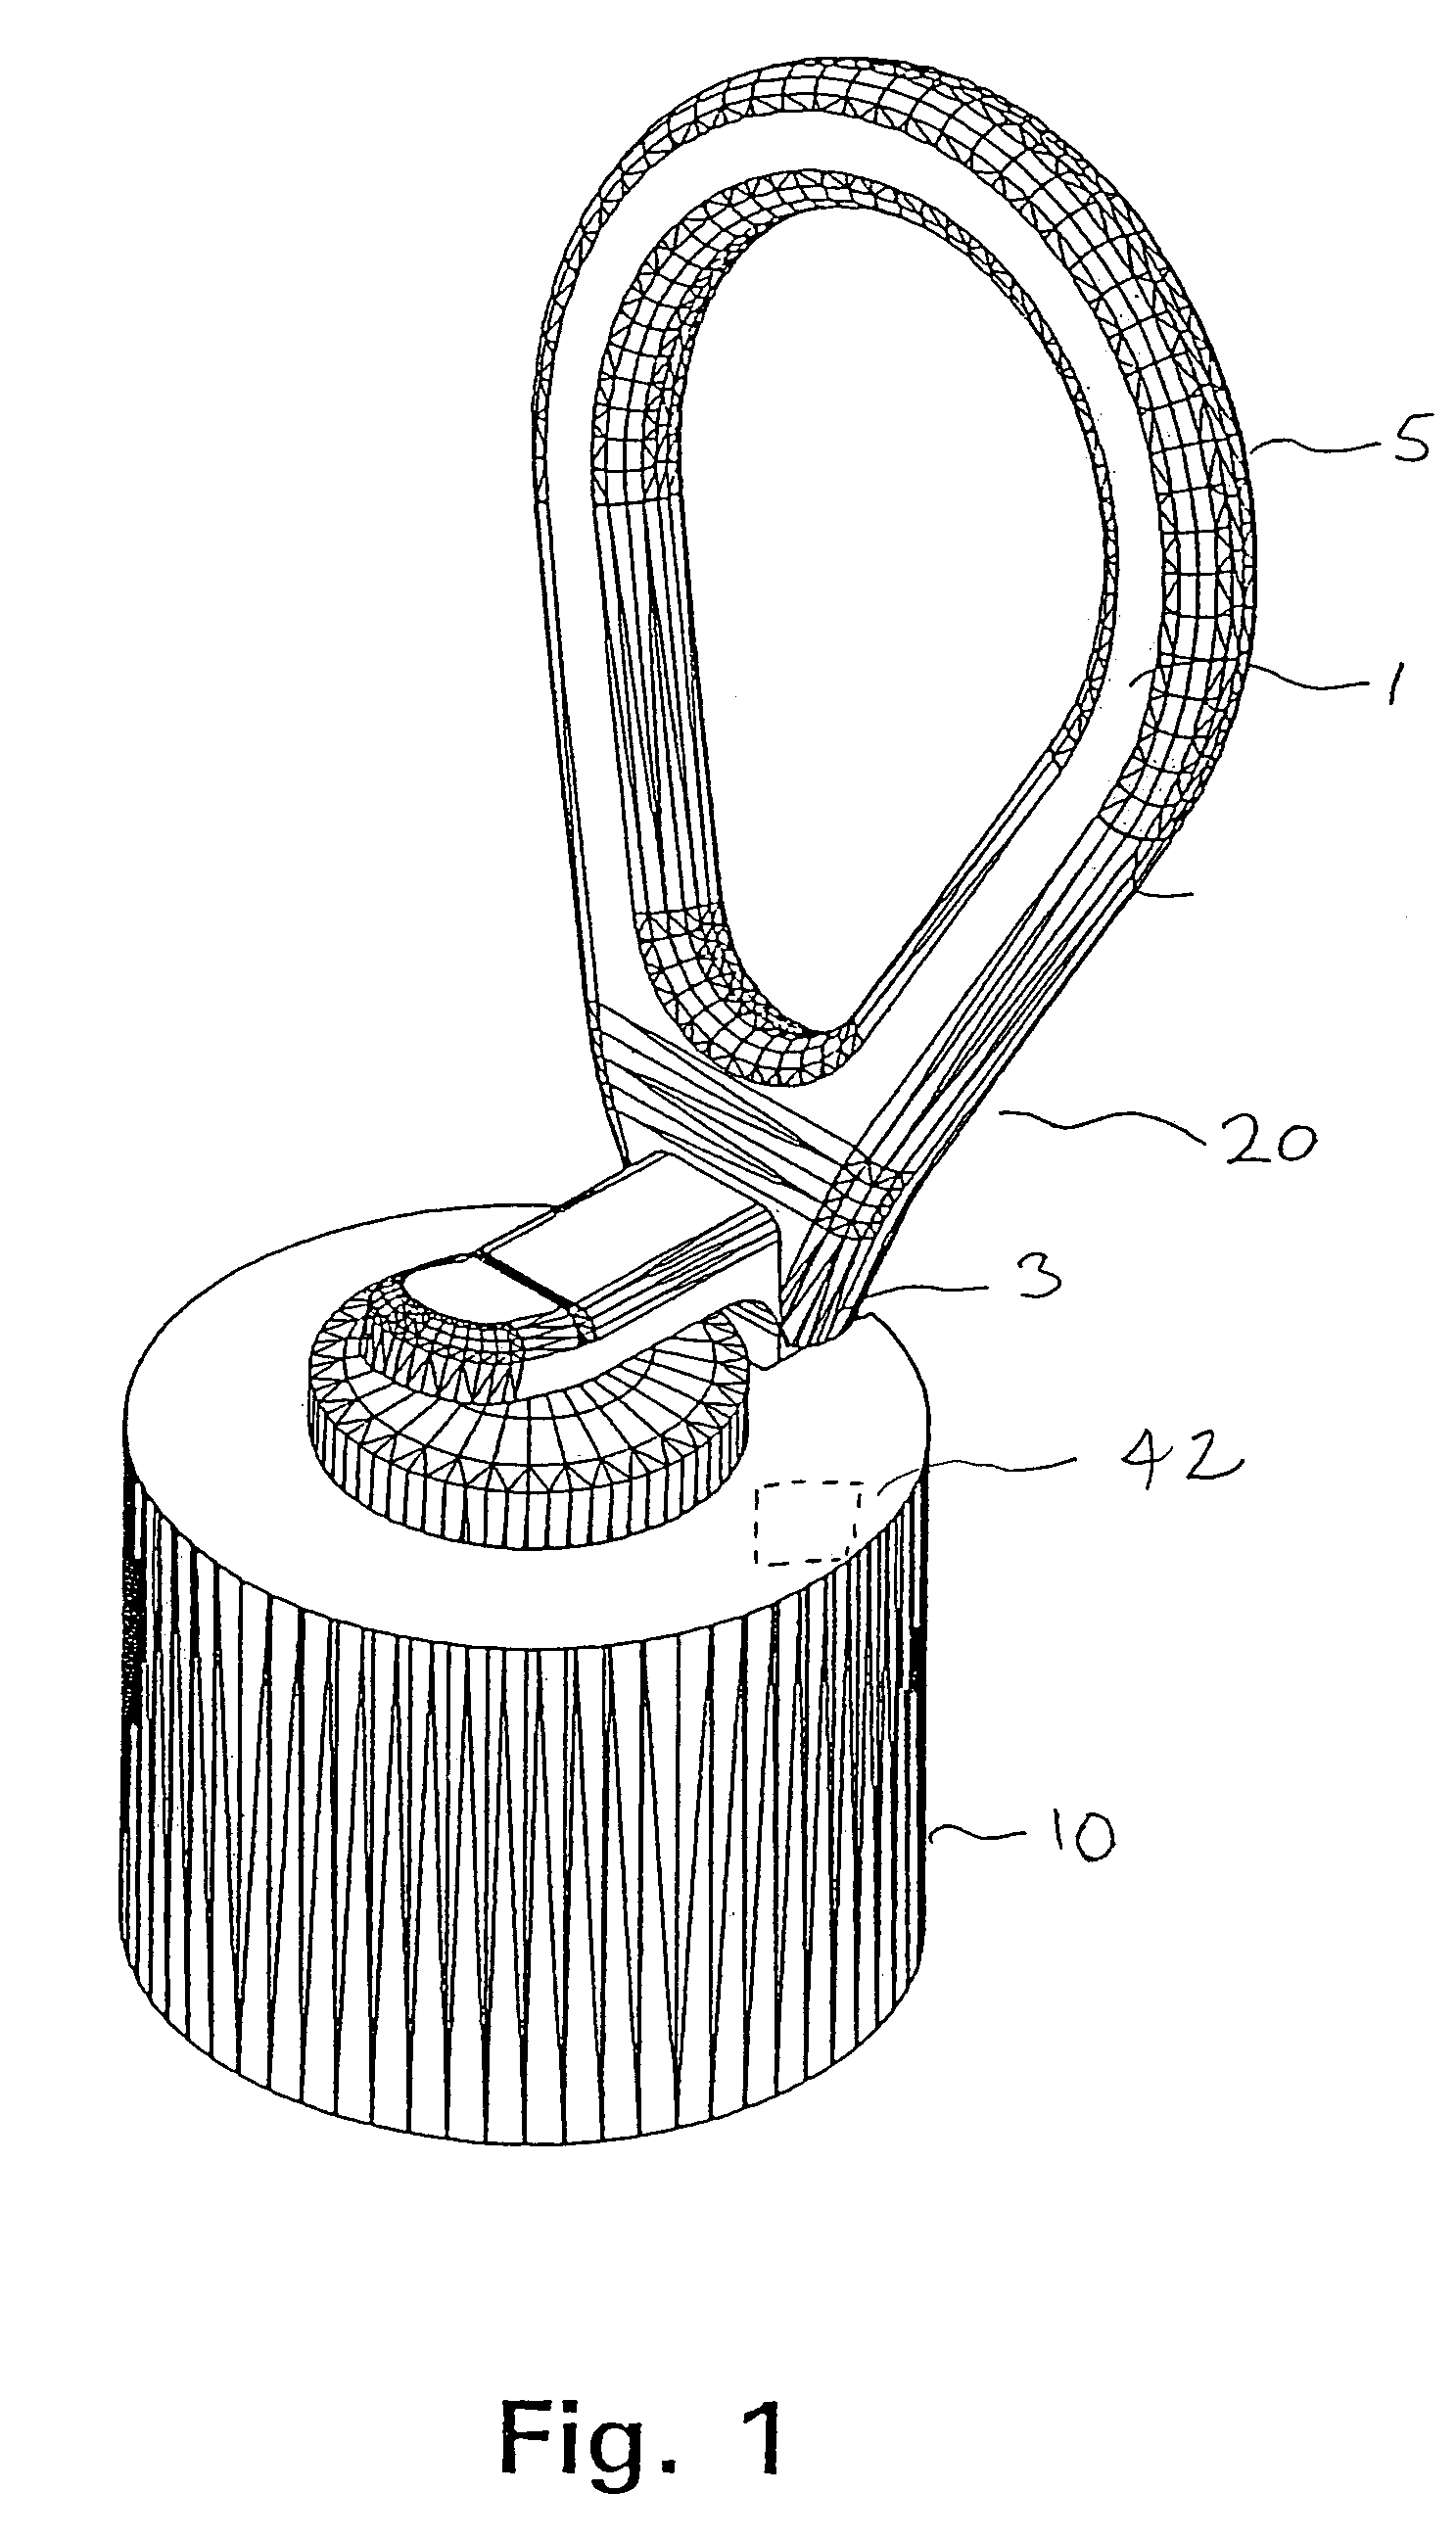 Hearing aid adapted for discrete operation